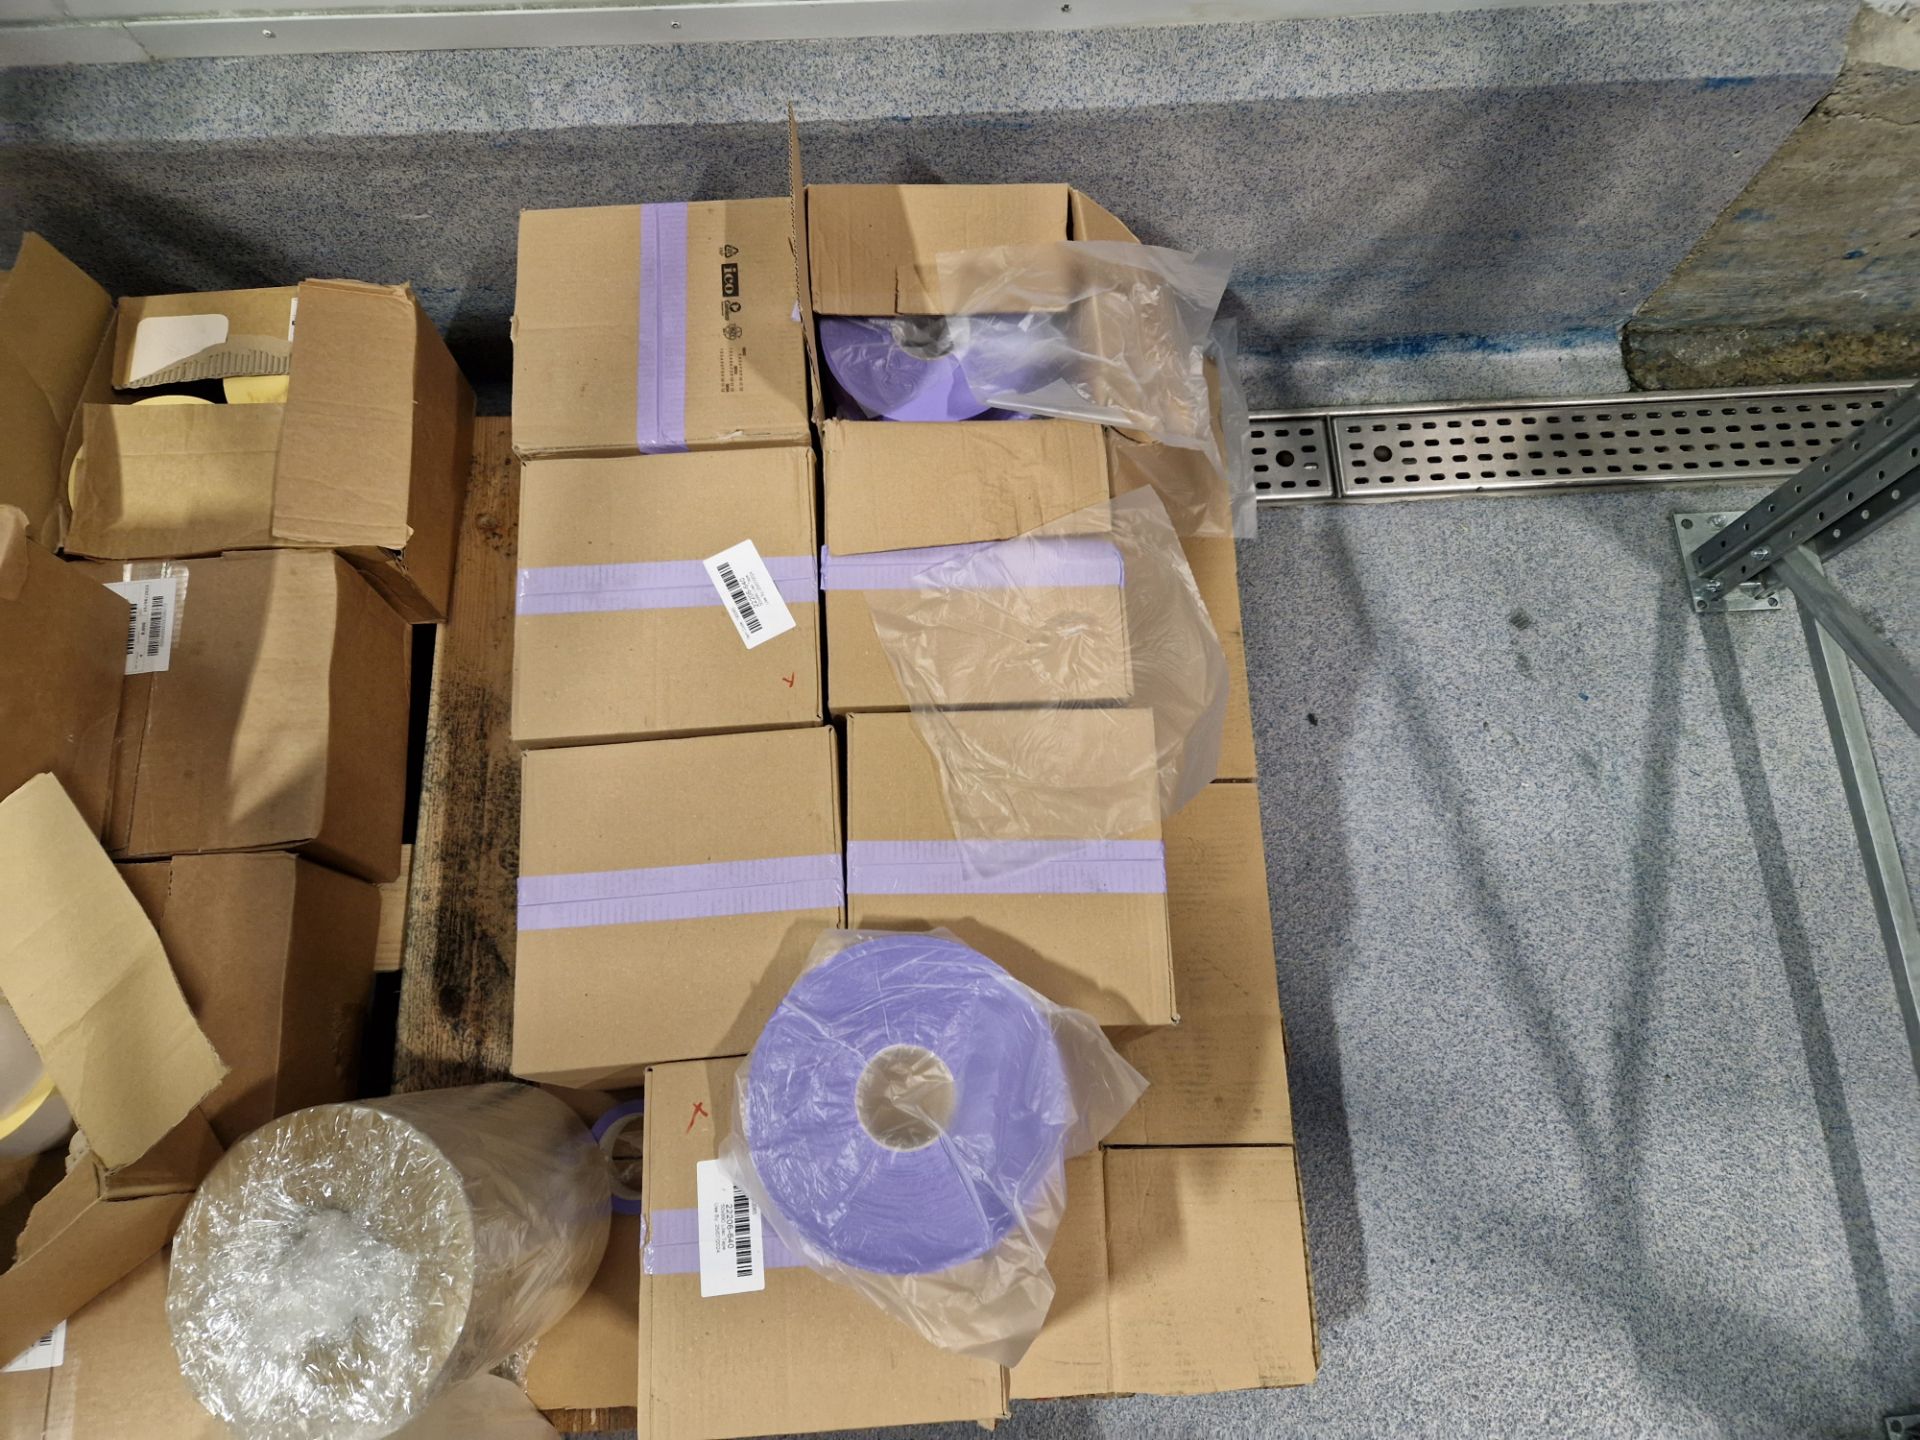 Quantity of Vibac 6 Trasp 48x990 105 Tape, White Labels and Puple Tape, as loted - Image 3 of 5